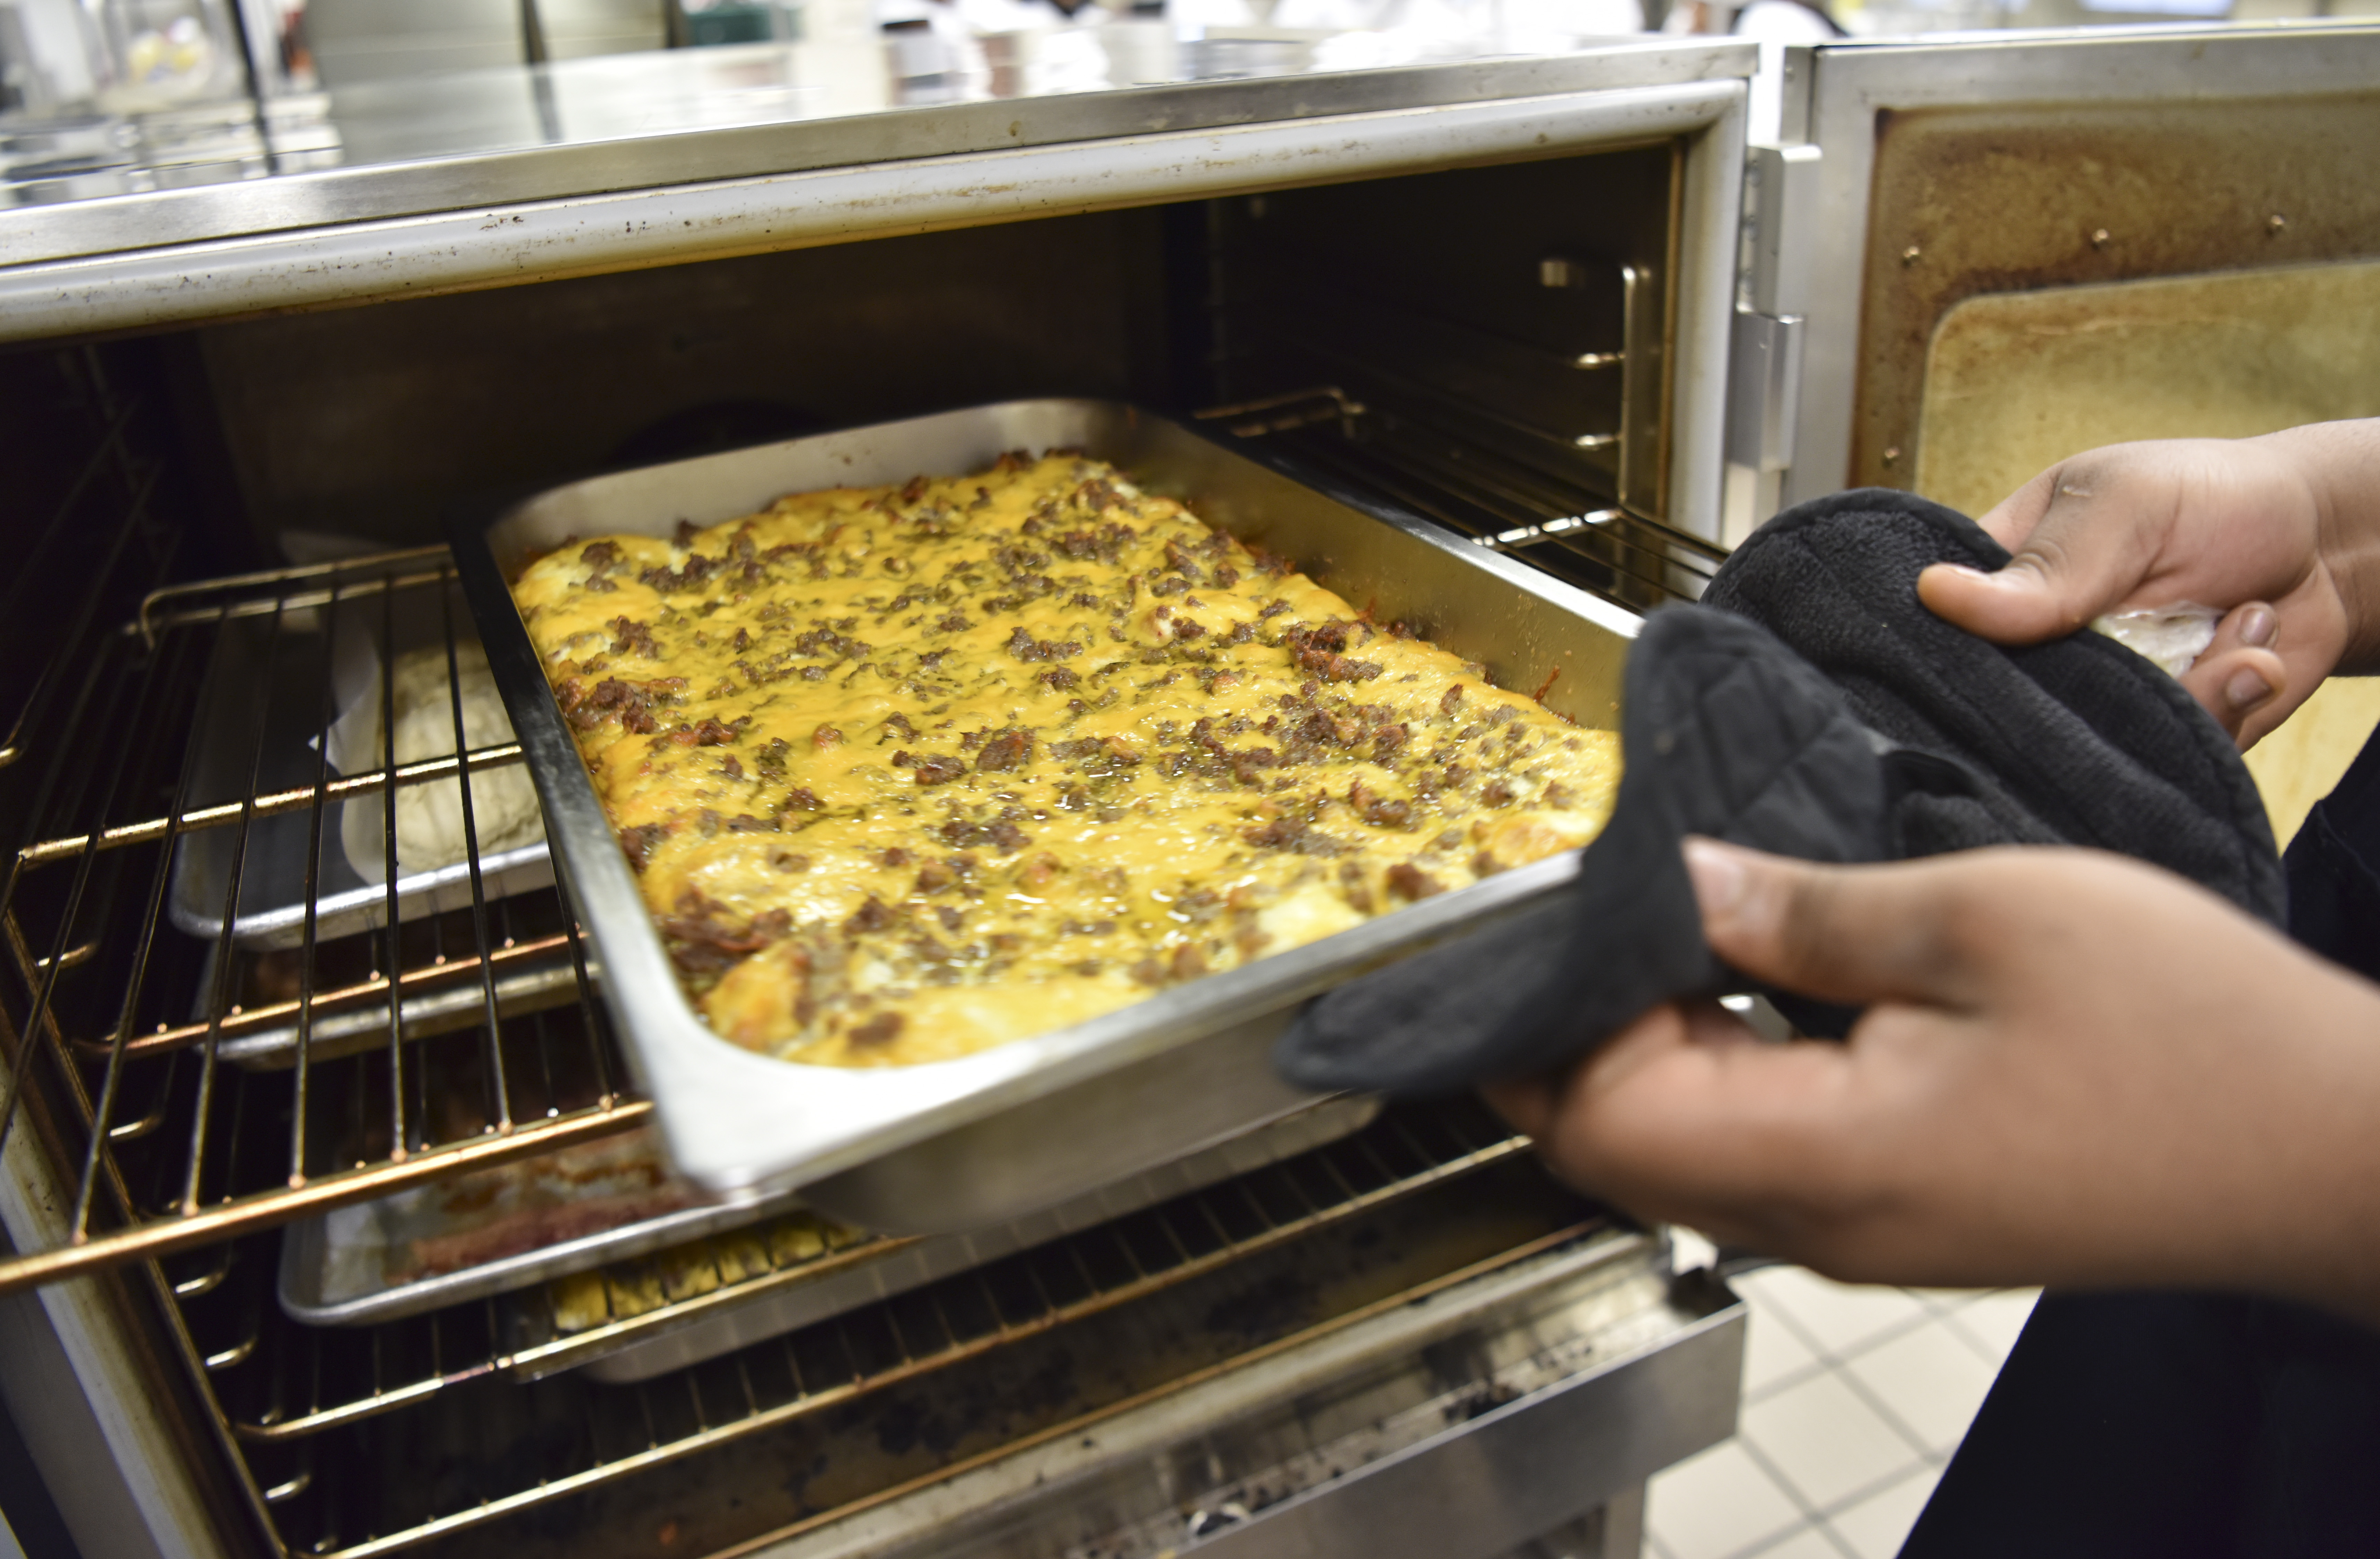 A breakfast casserole is ready and pulled from an oven in the kitchen. The Wenonah High School Culinary Arts program teaches students commercial kitchen skills. (Frank Couch, The Birmingham Times)